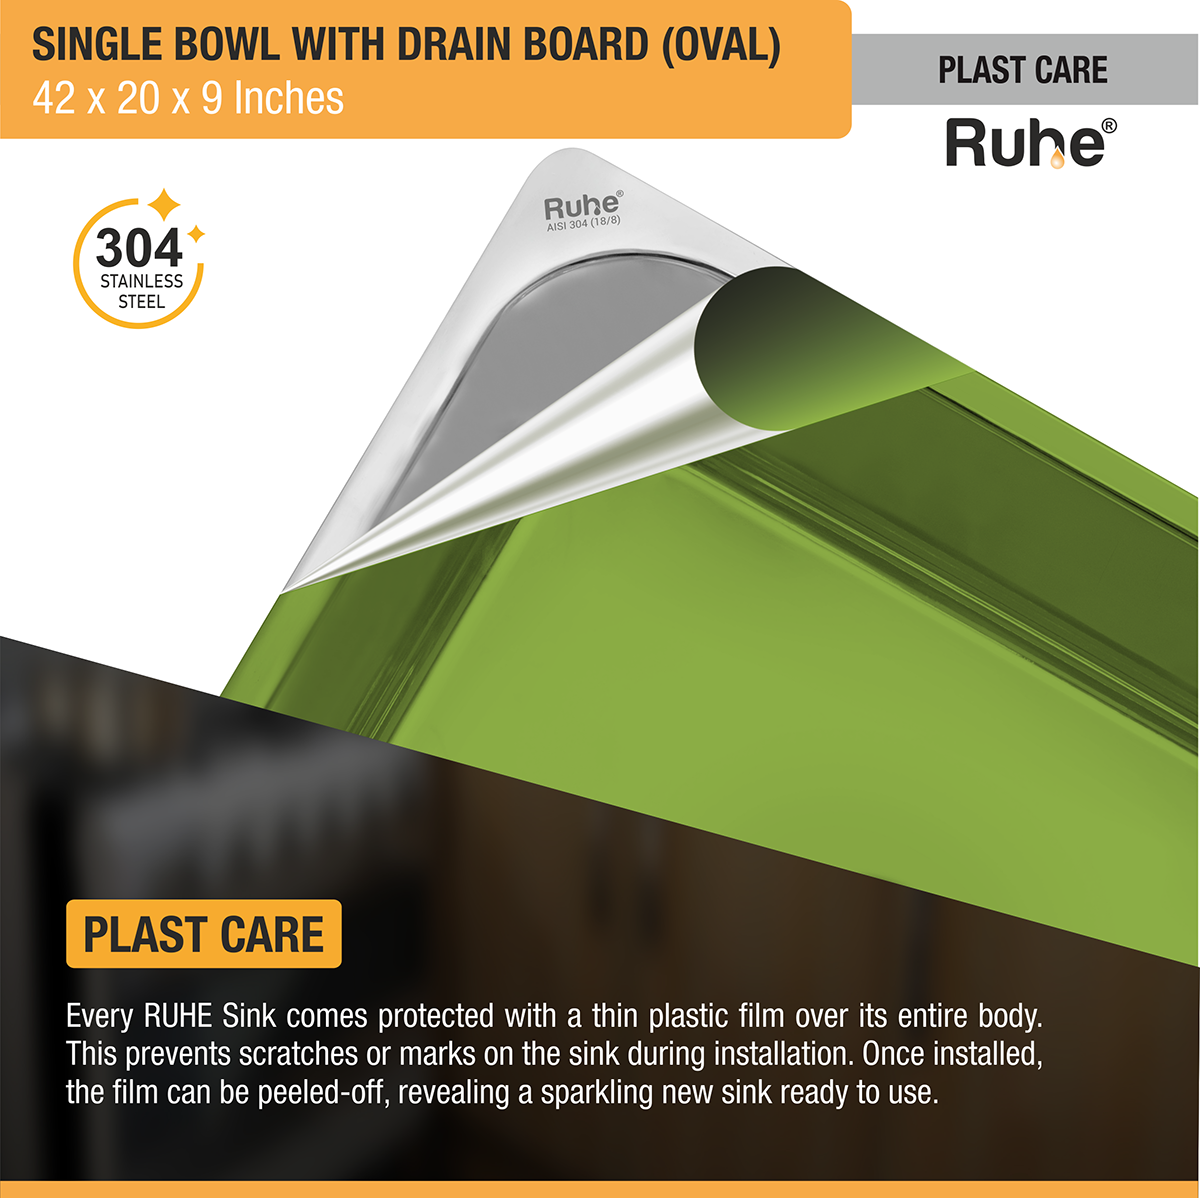 Oval Single Bowl (42 x 20 x 9 inches) 304-Grade Stainless Steel Kitchen Sink with Drainboard plast care